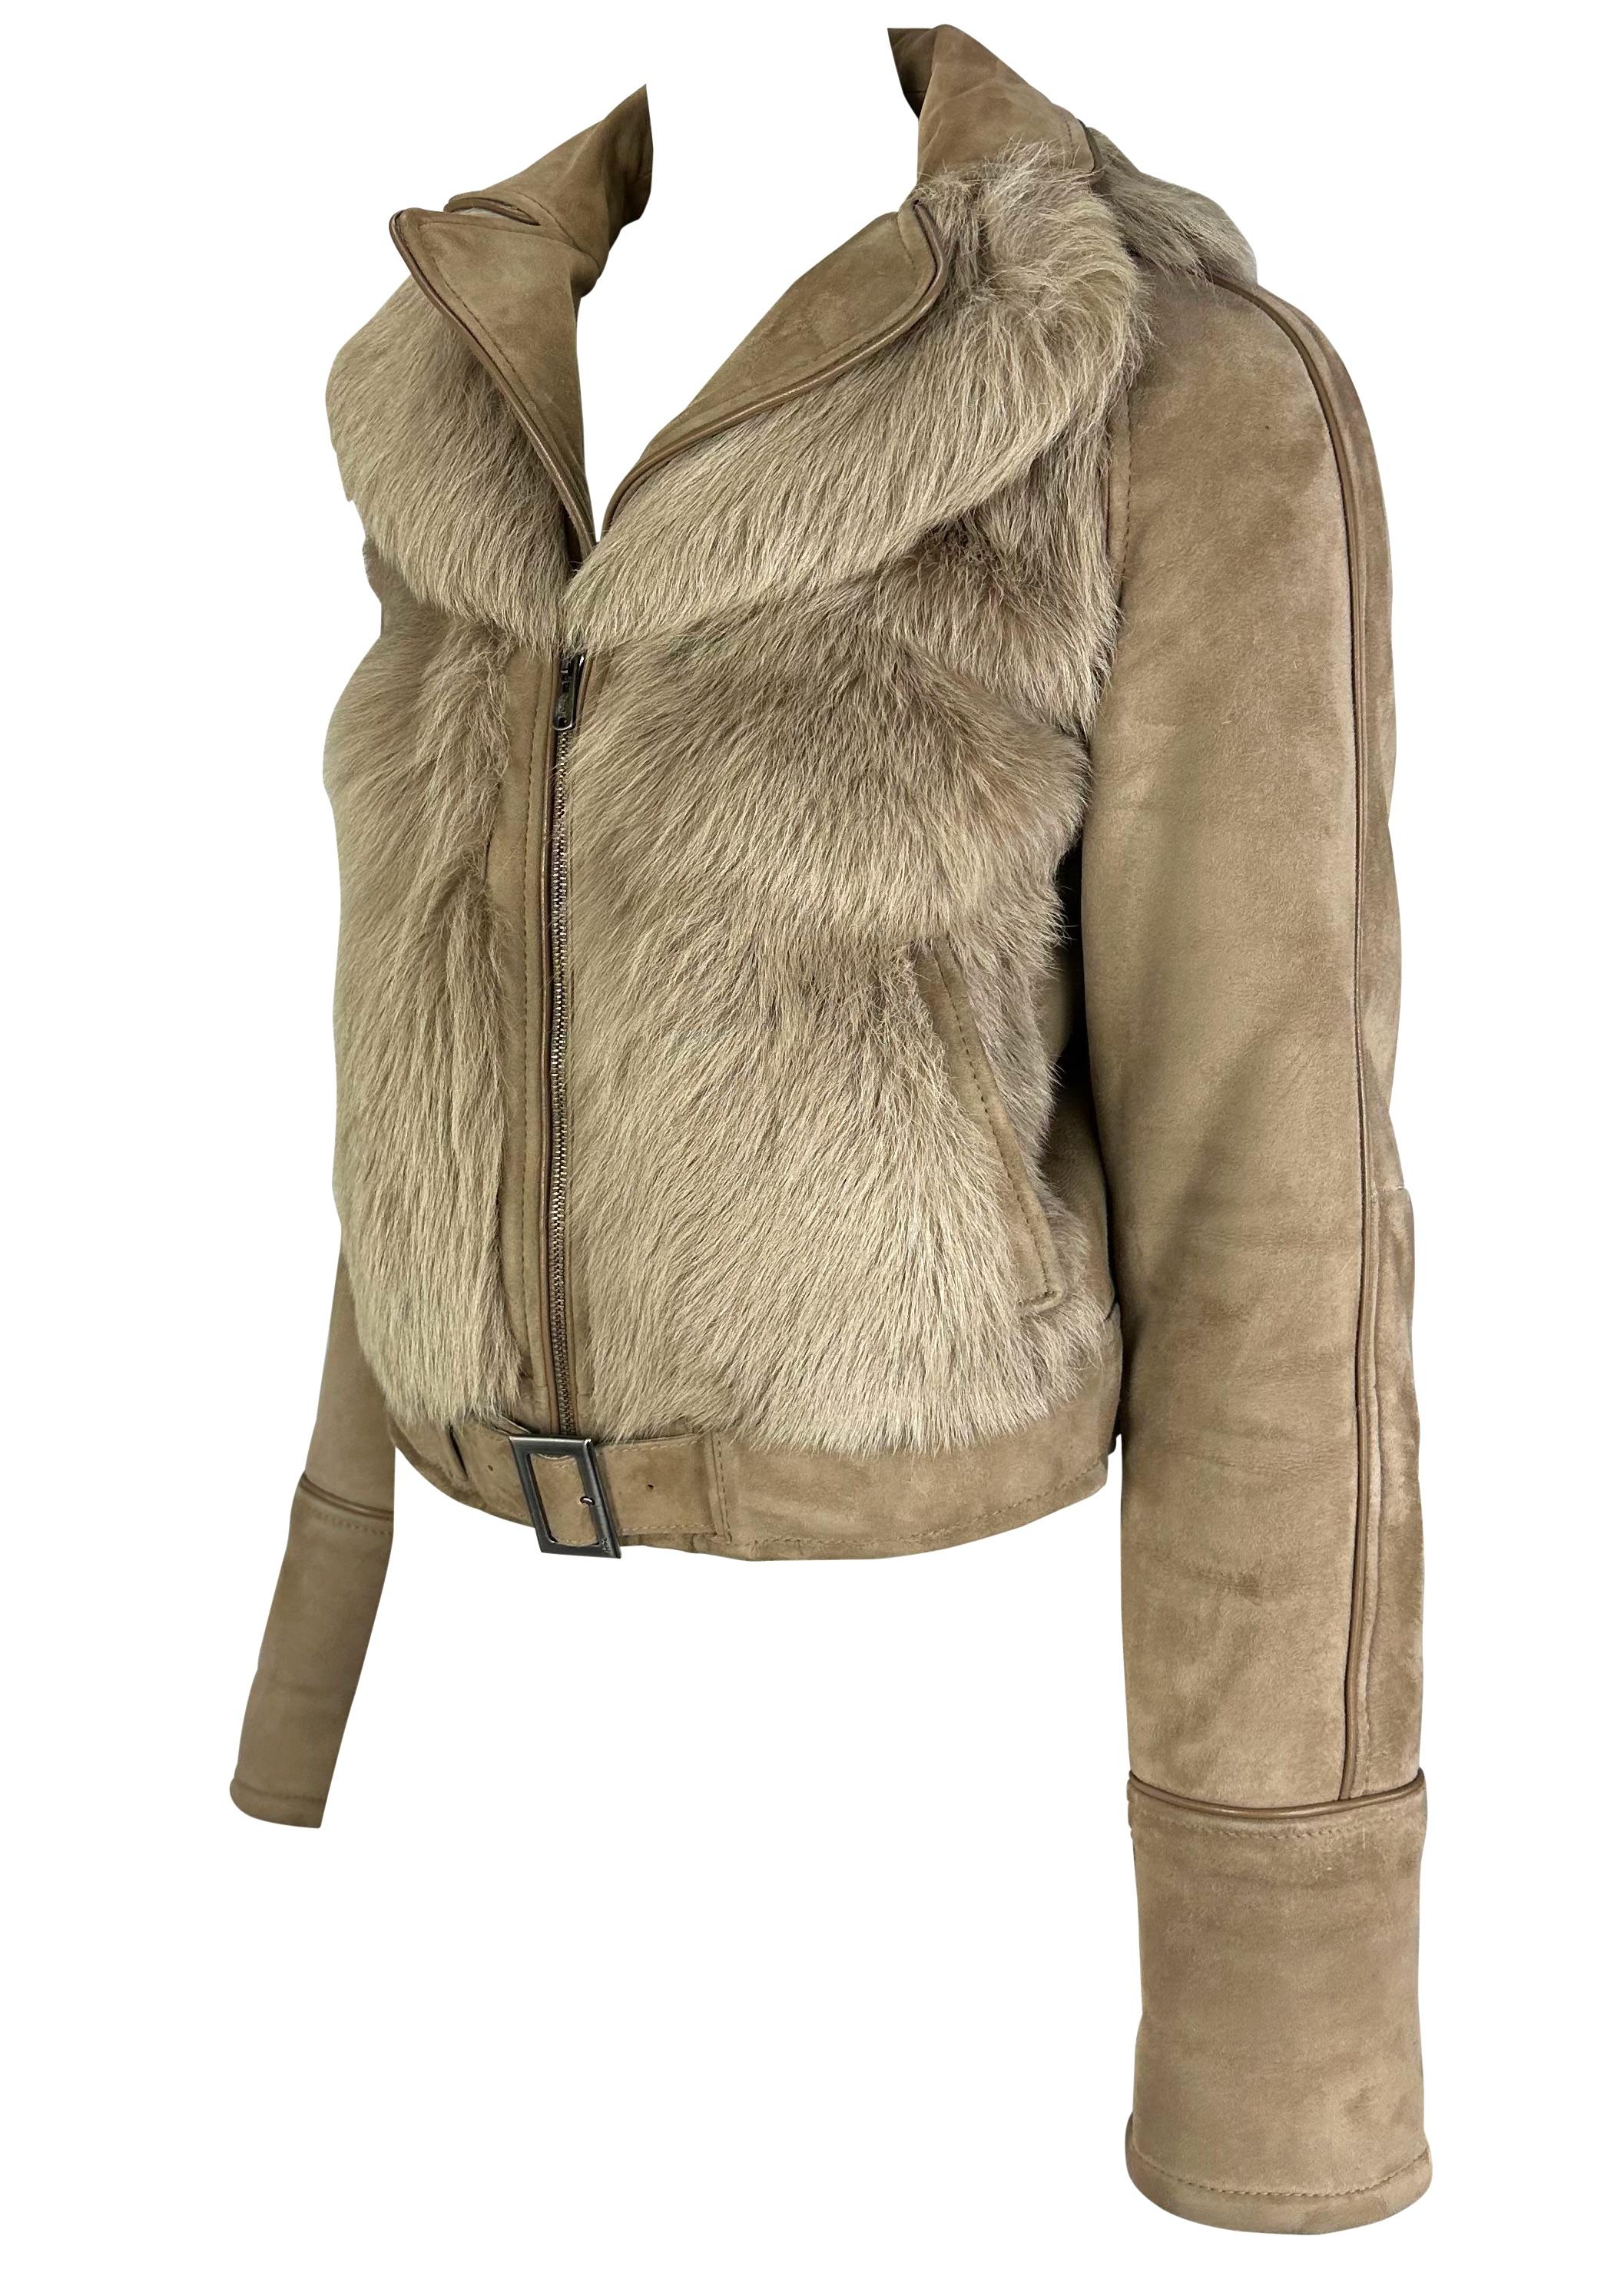 Presenting a fabulous beige goat fur suede Yves Saint Laurent moto coat. From the early 2000s, this incredible coat is constructed entirely of monotone fur and supple suede with a zipper closure, belt, and layered collar. This incredible coat is